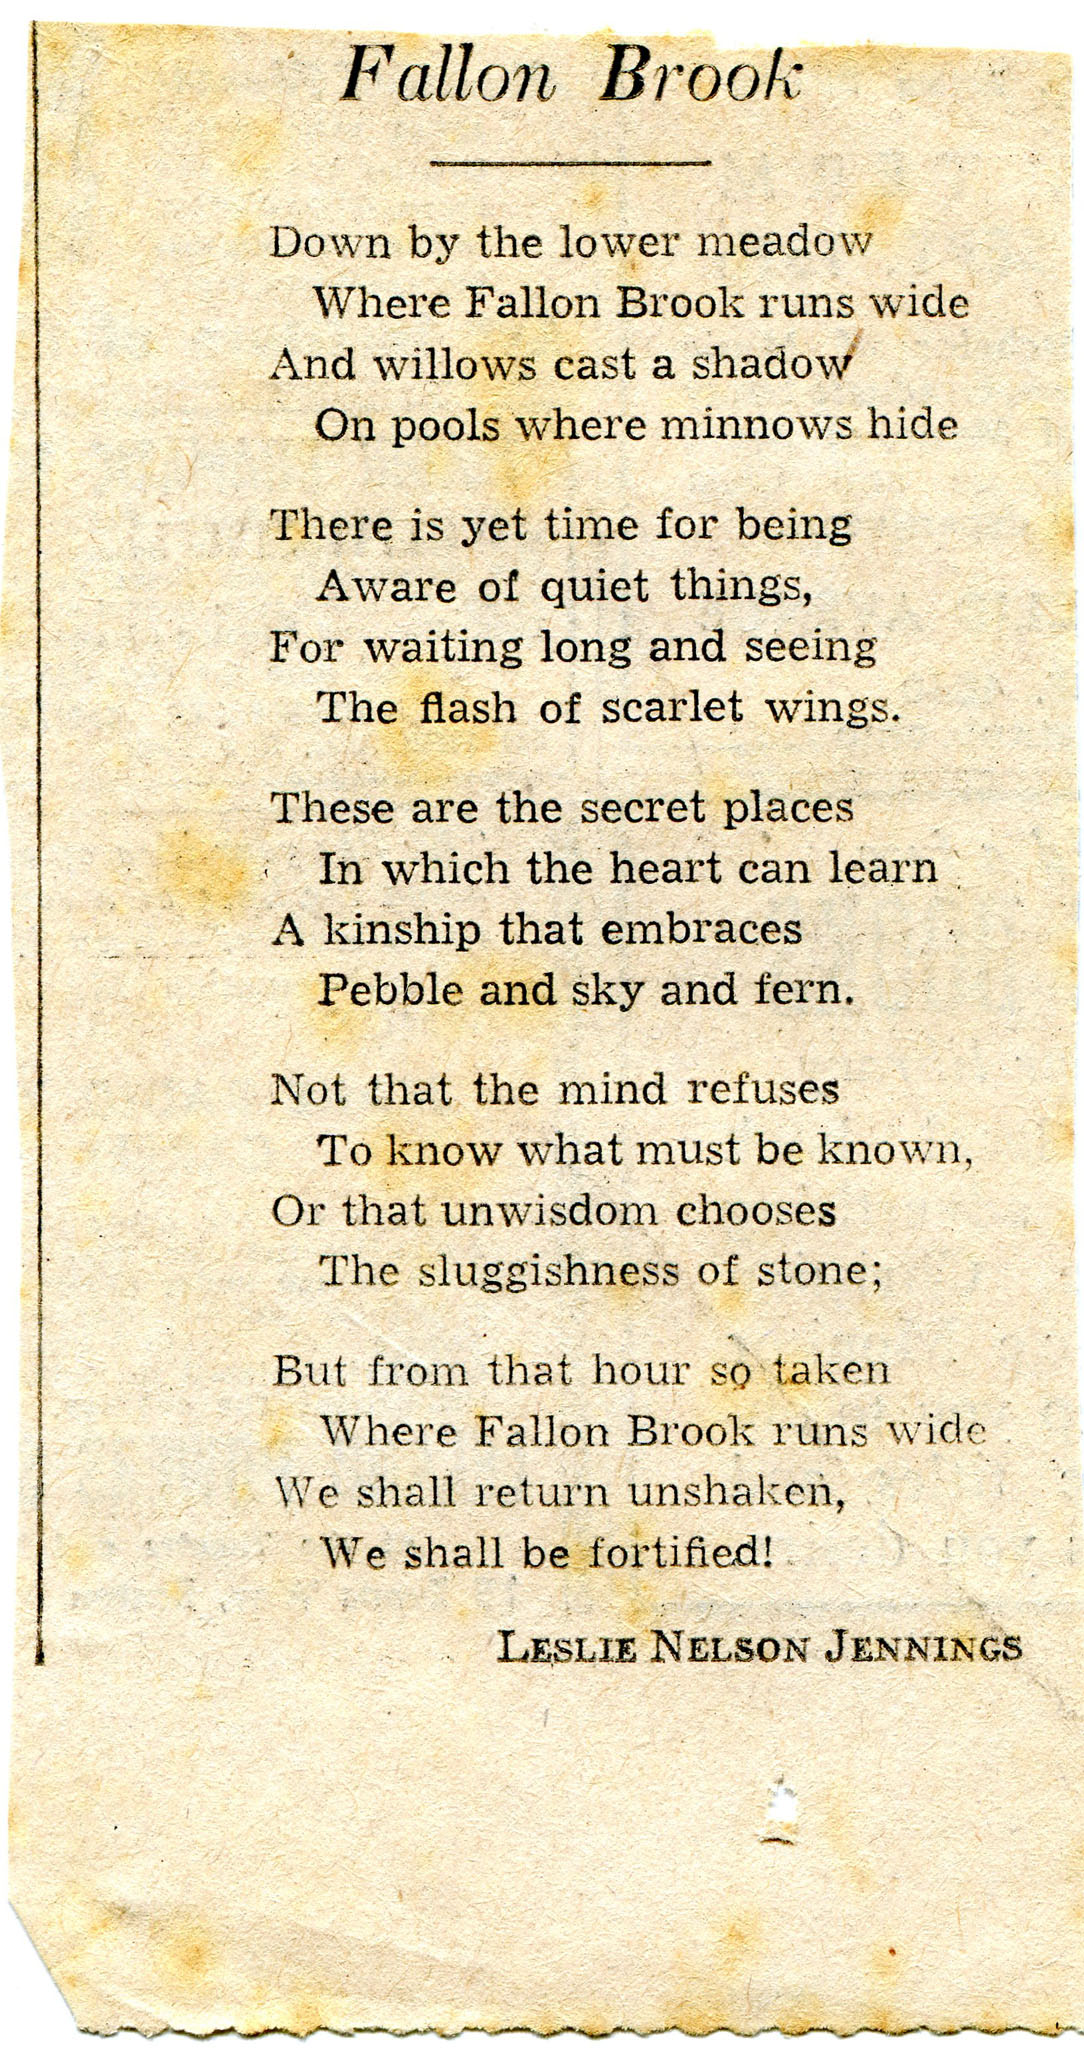 Poem cut from what appears to be an American newspaper (addresses on ...